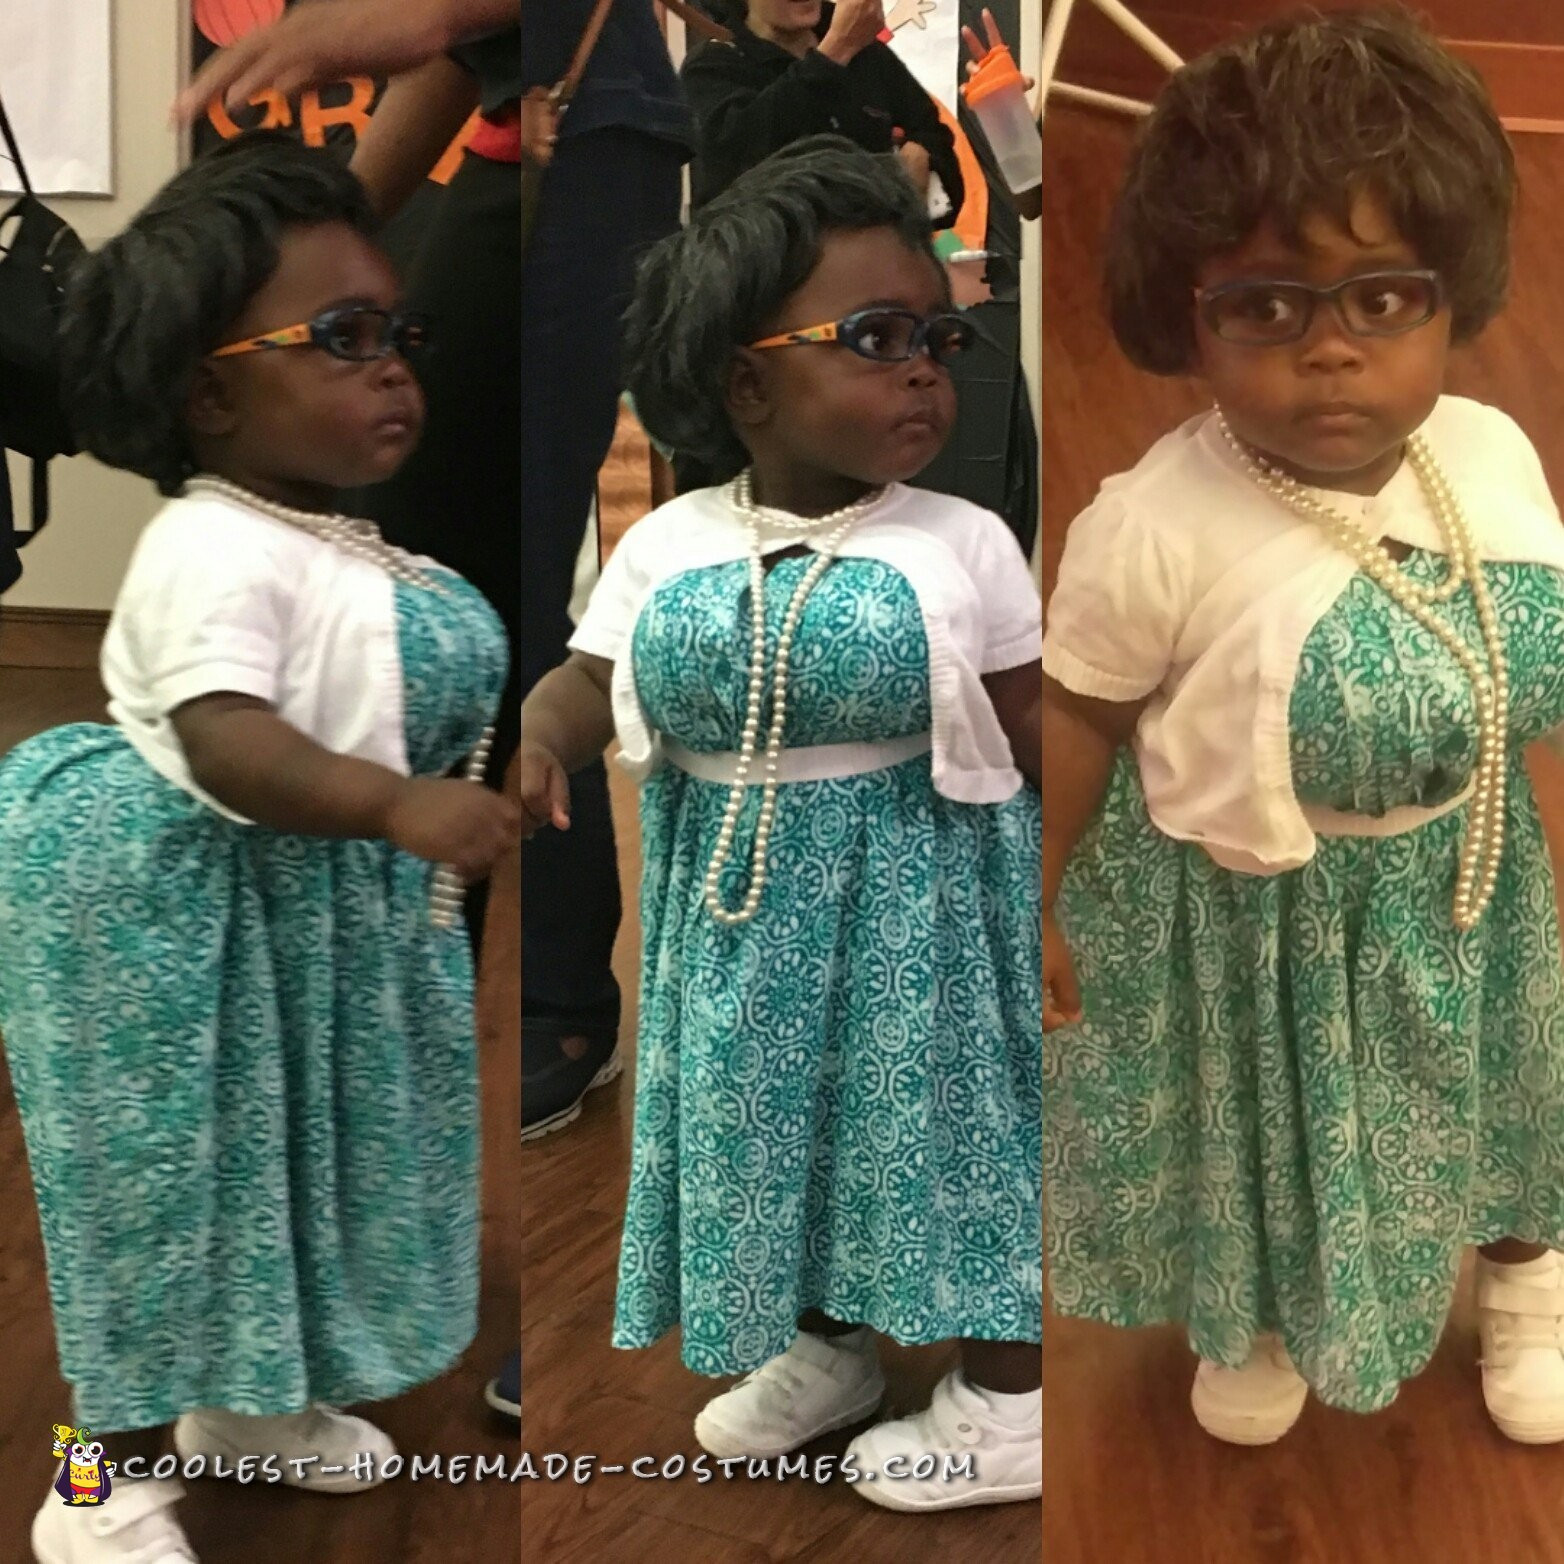 DIY Halloween Costumes For Toddler
 Adorable DIY Madea Halloween Costume for a Toddler